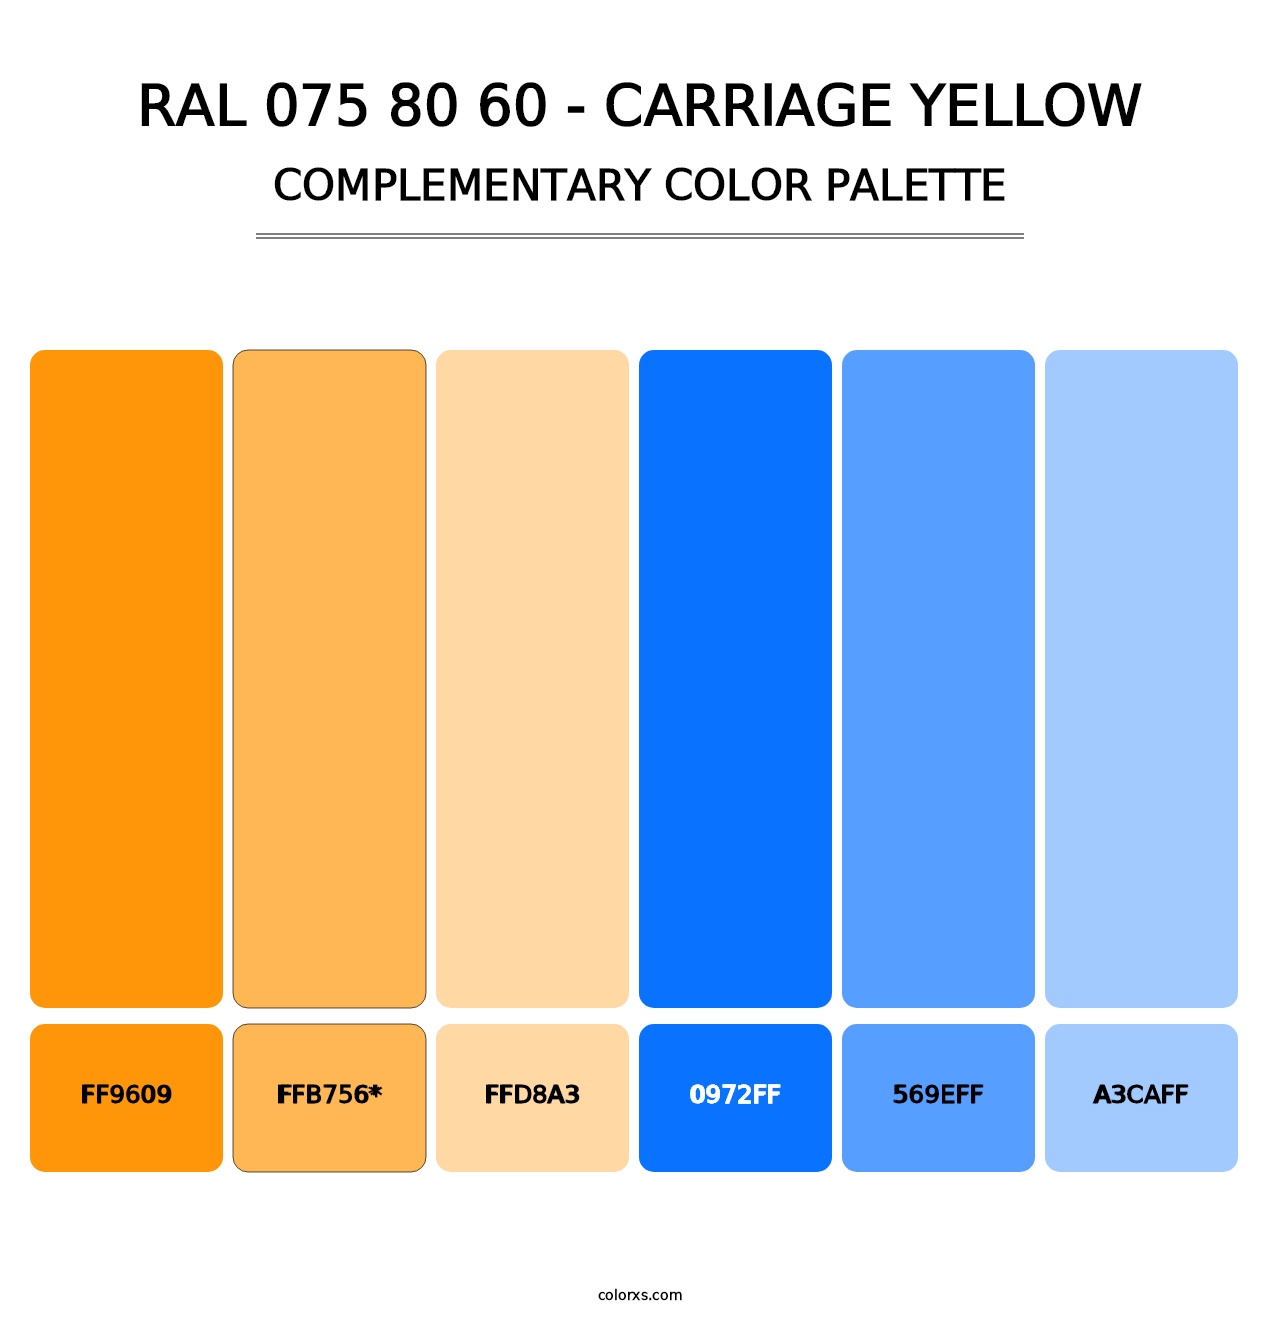 RAL 075 80 60 - Carriage Yellow - Complementary Color Palette